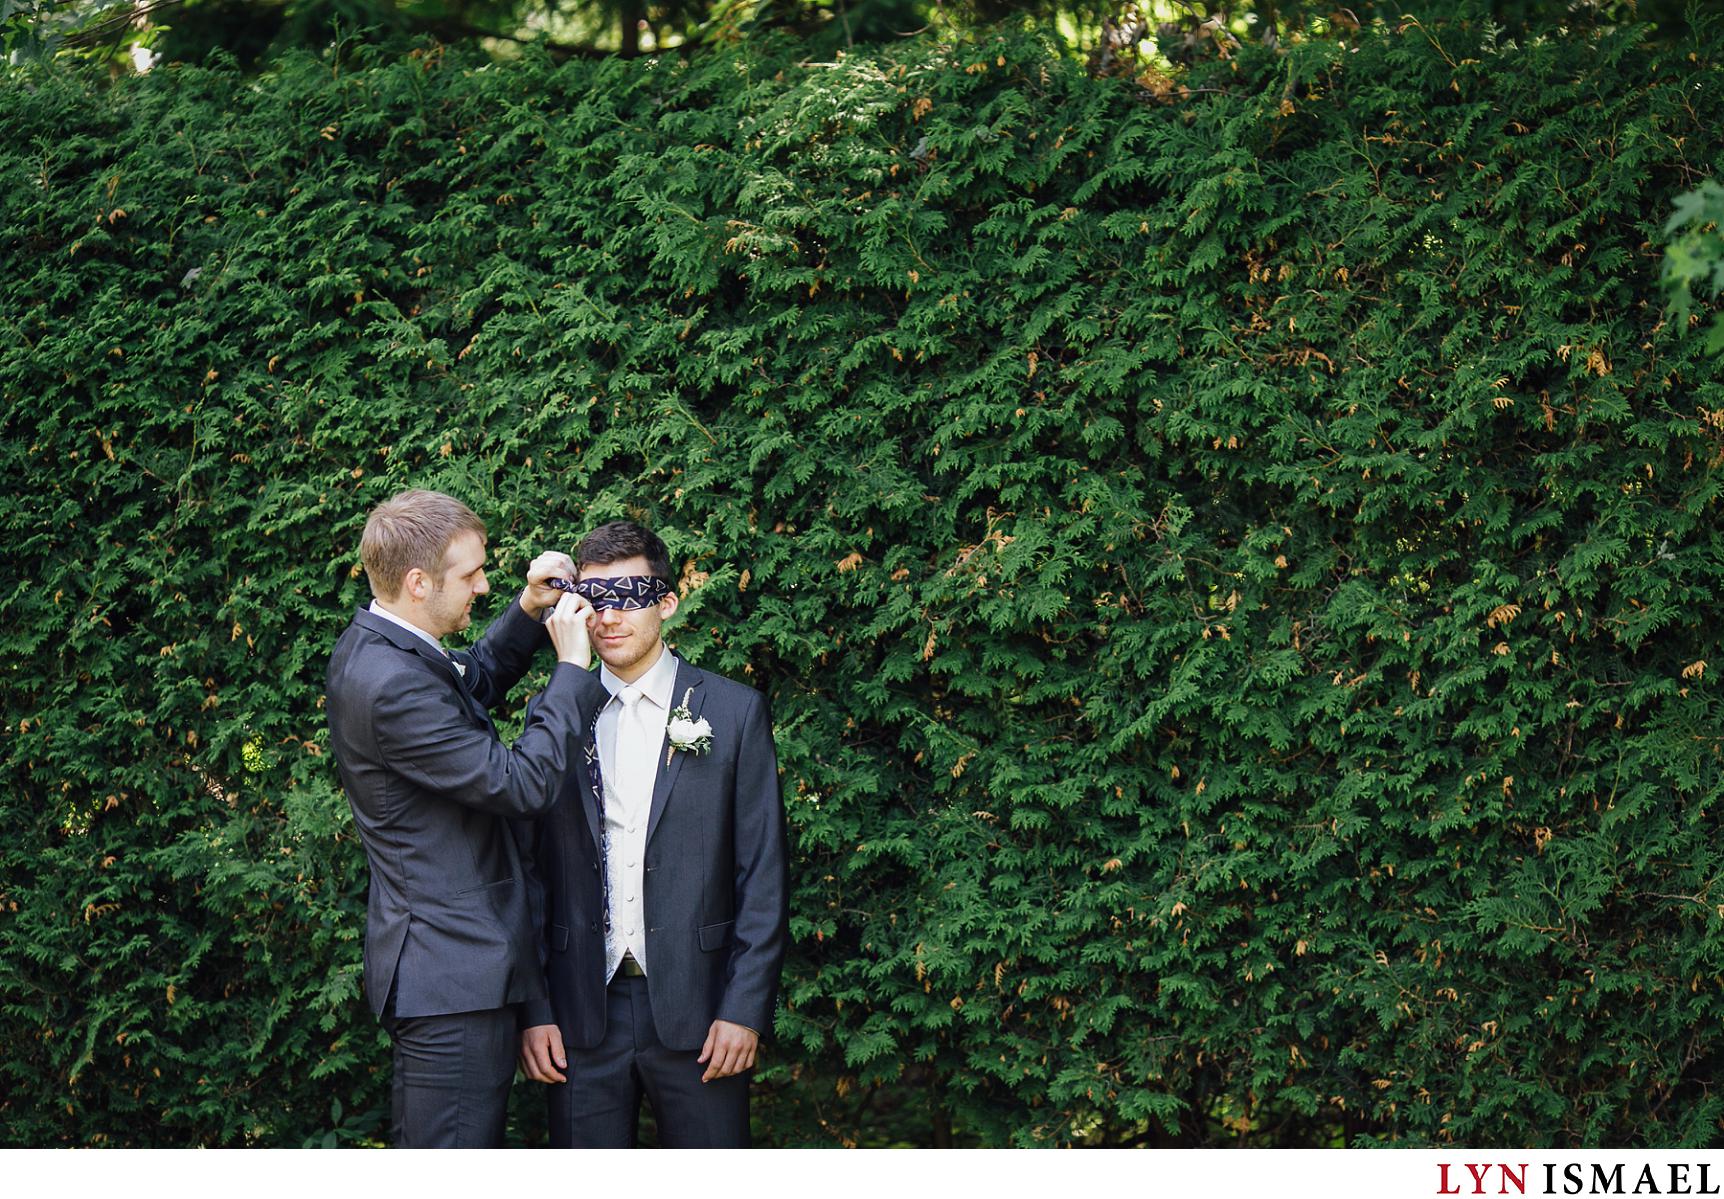 Groom's eyes get covered so he could talk to his bride before the wedding.